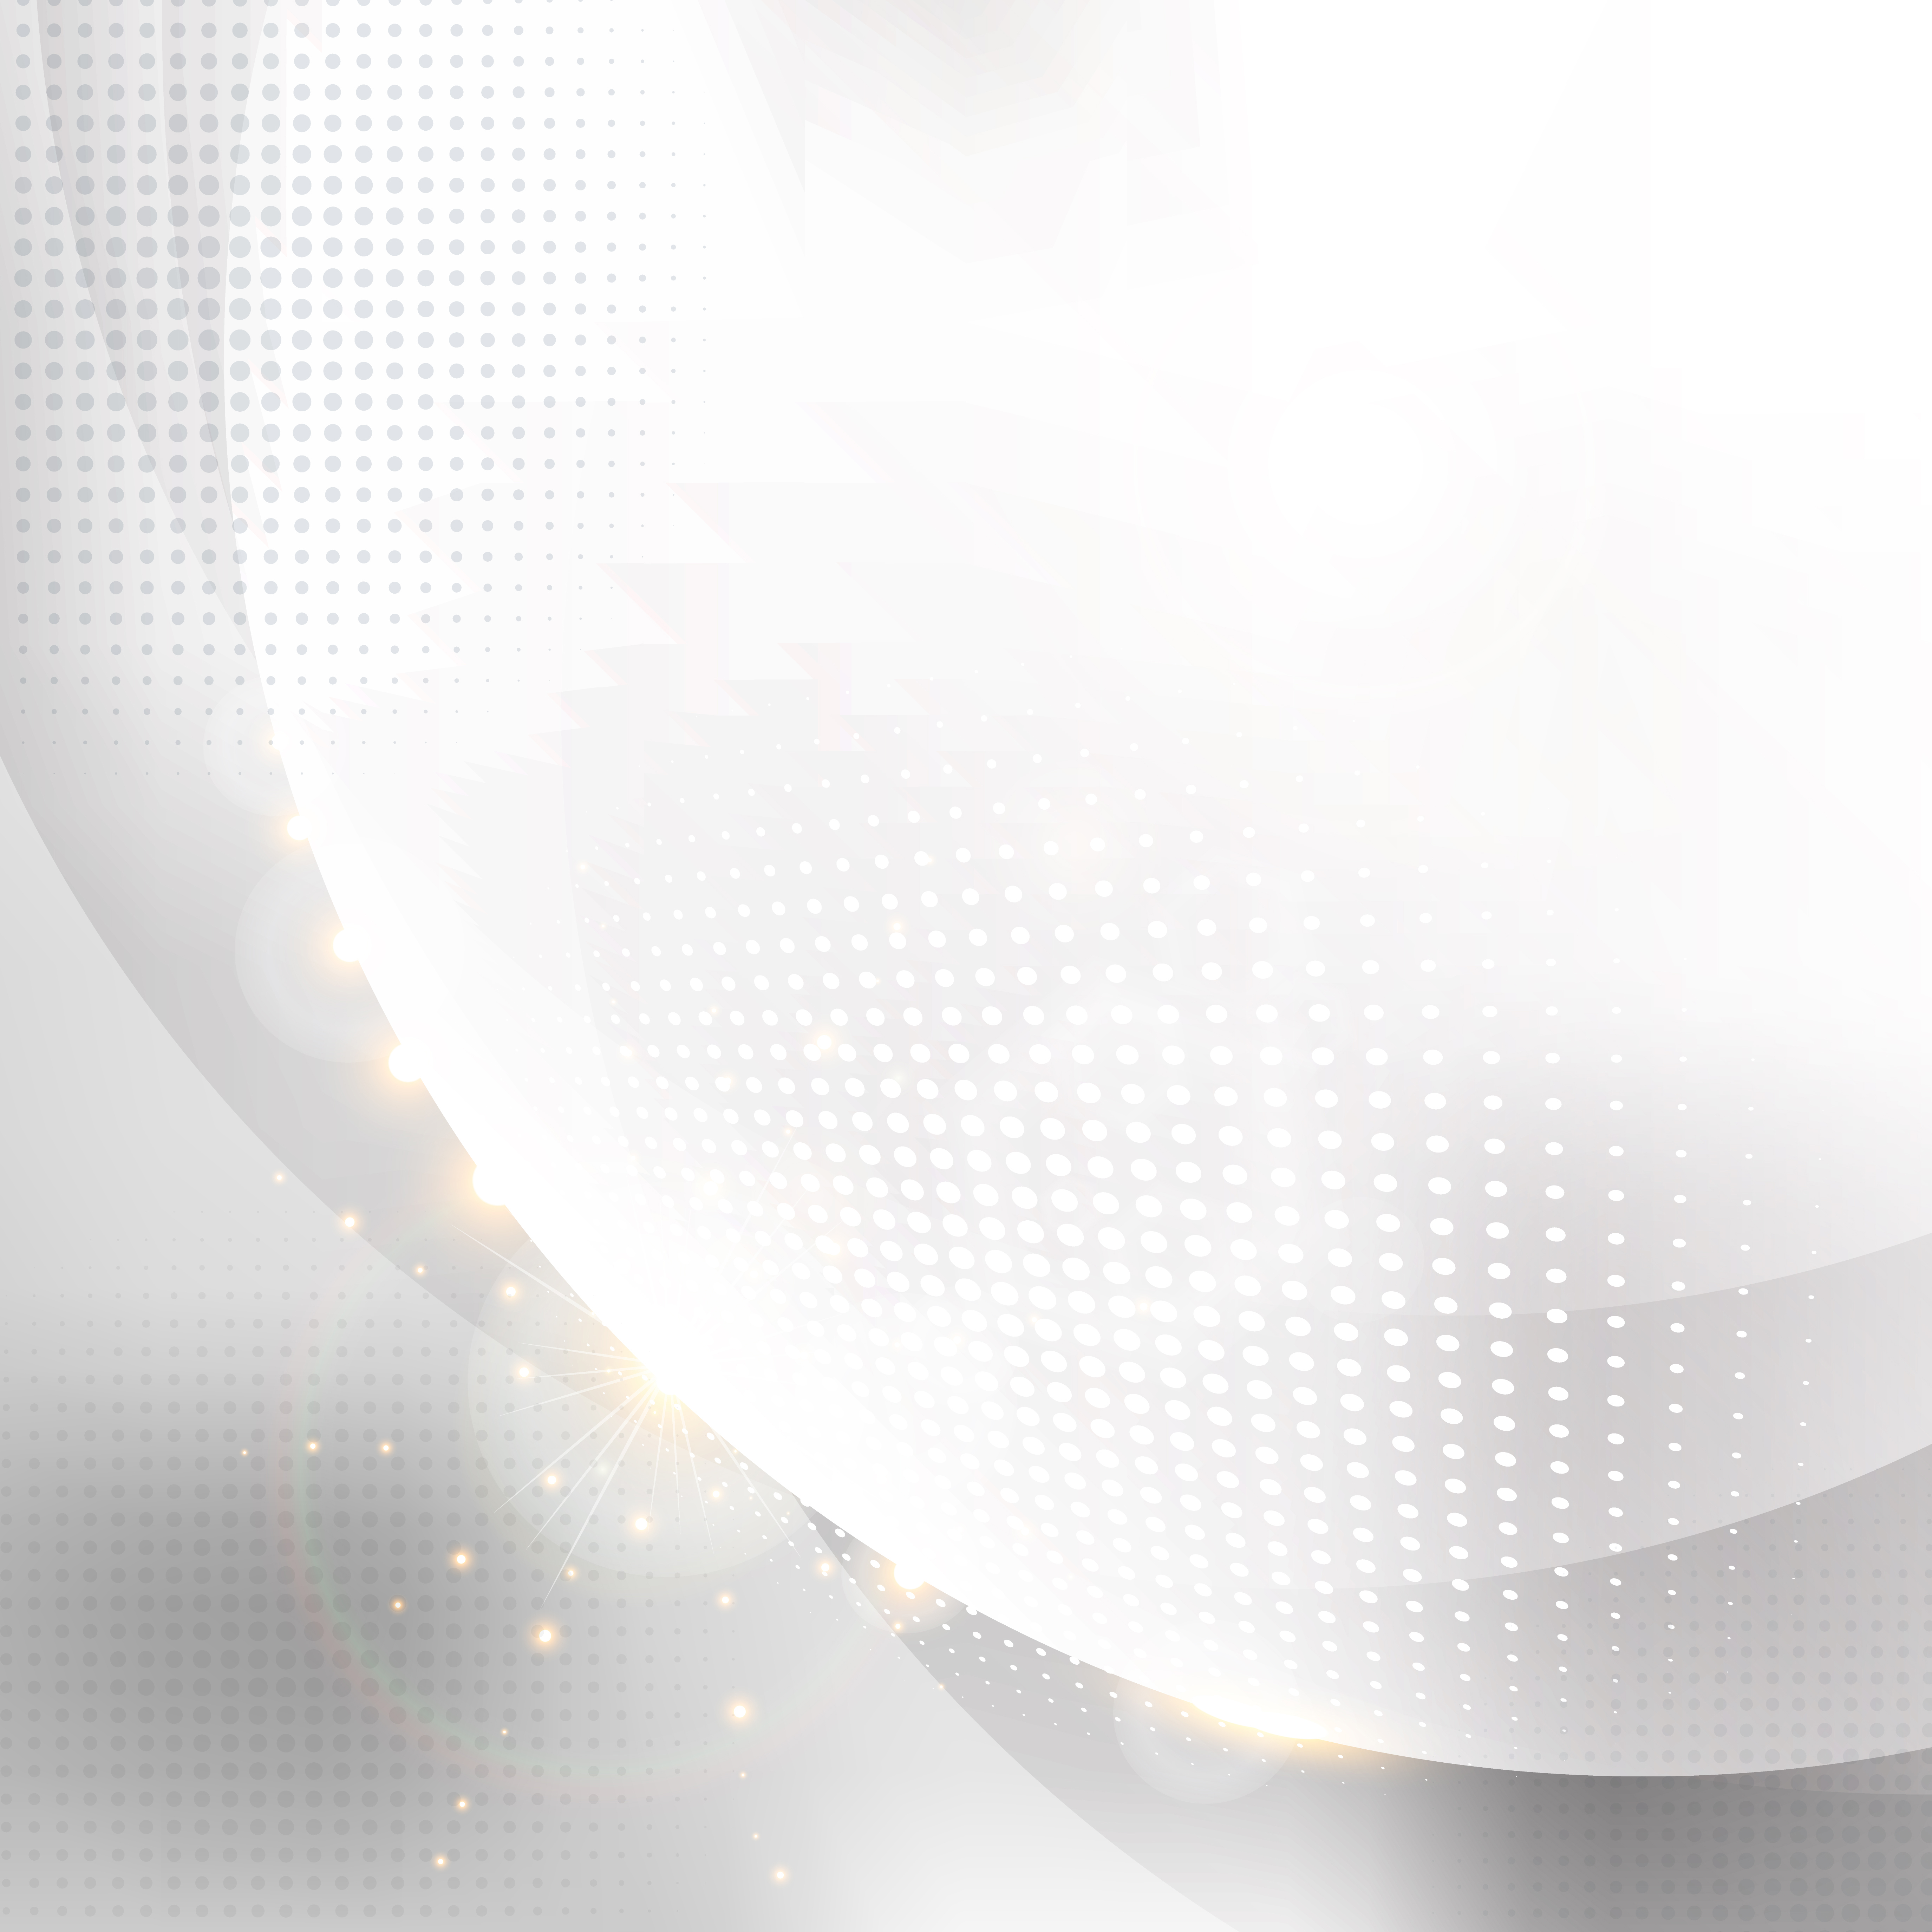 Elegant circles white with halftone abstract white background. 600376 ...